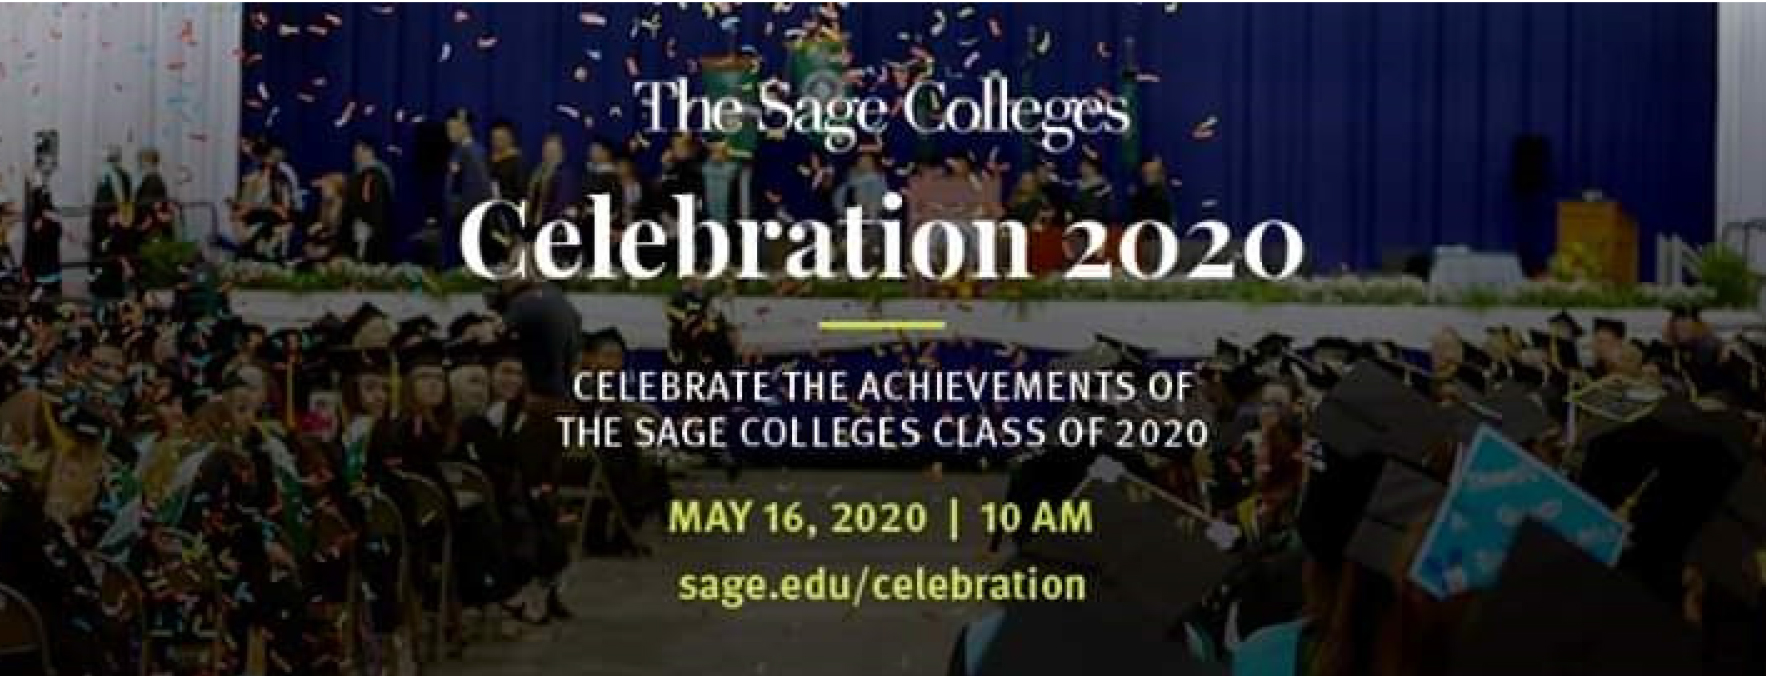 Join us for a celebration of the class of 2020 on May 16 at 10 a.m.!